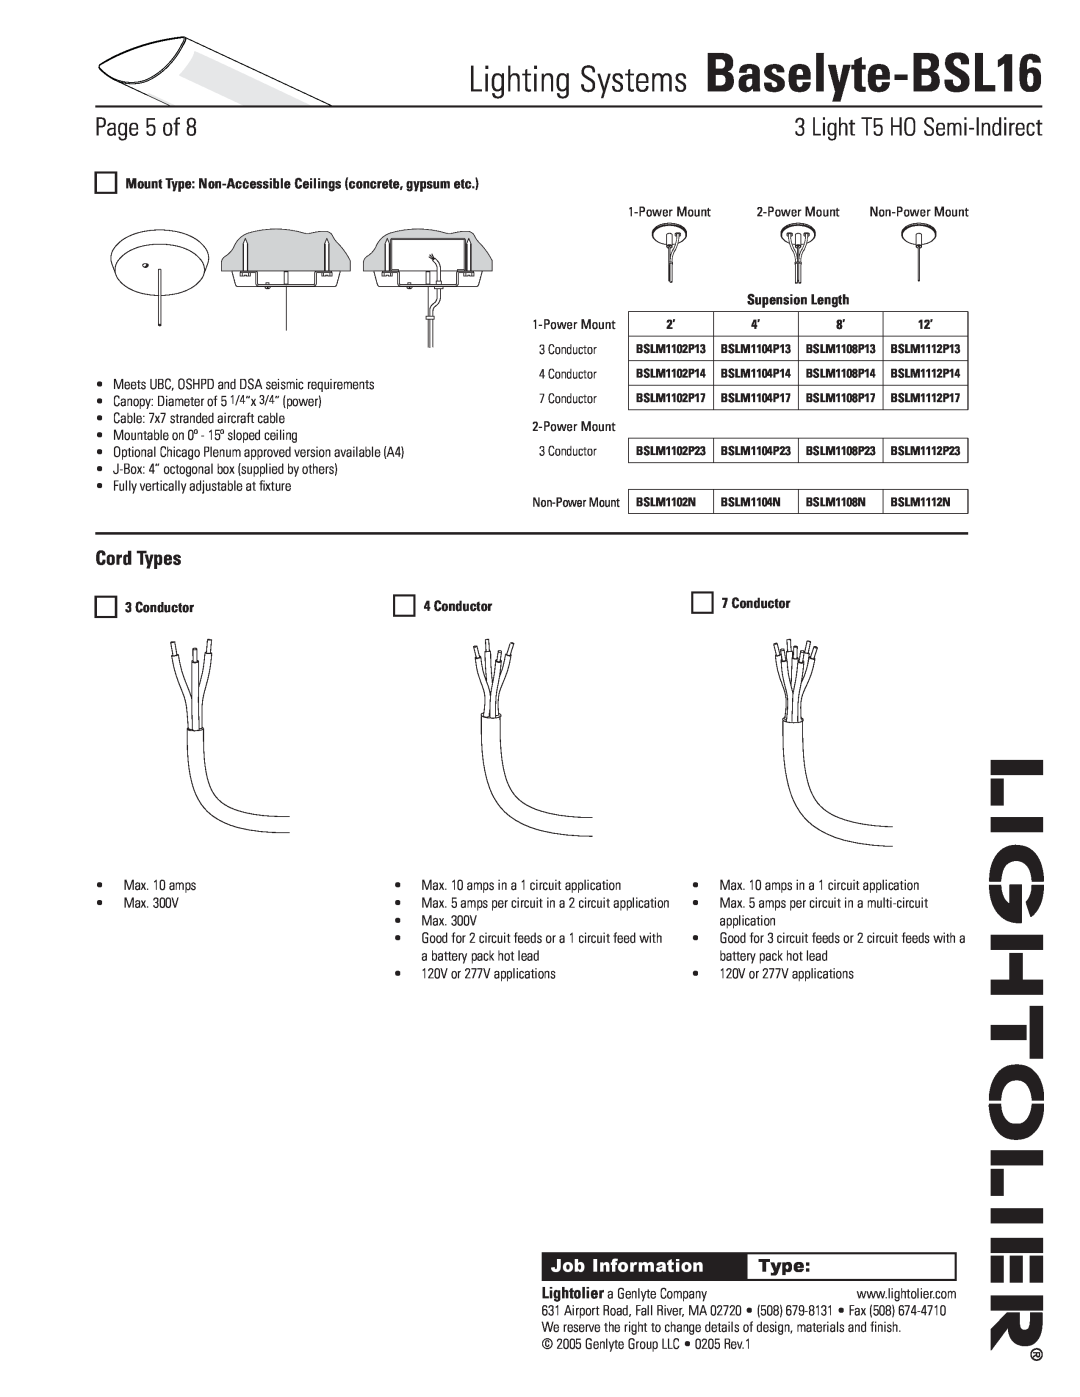 Lightolier Cord Types, Conductor, Lighting Systems Baselyte-BSL16, Page of, Light T5 HO Semi-Indirect, Job Information 